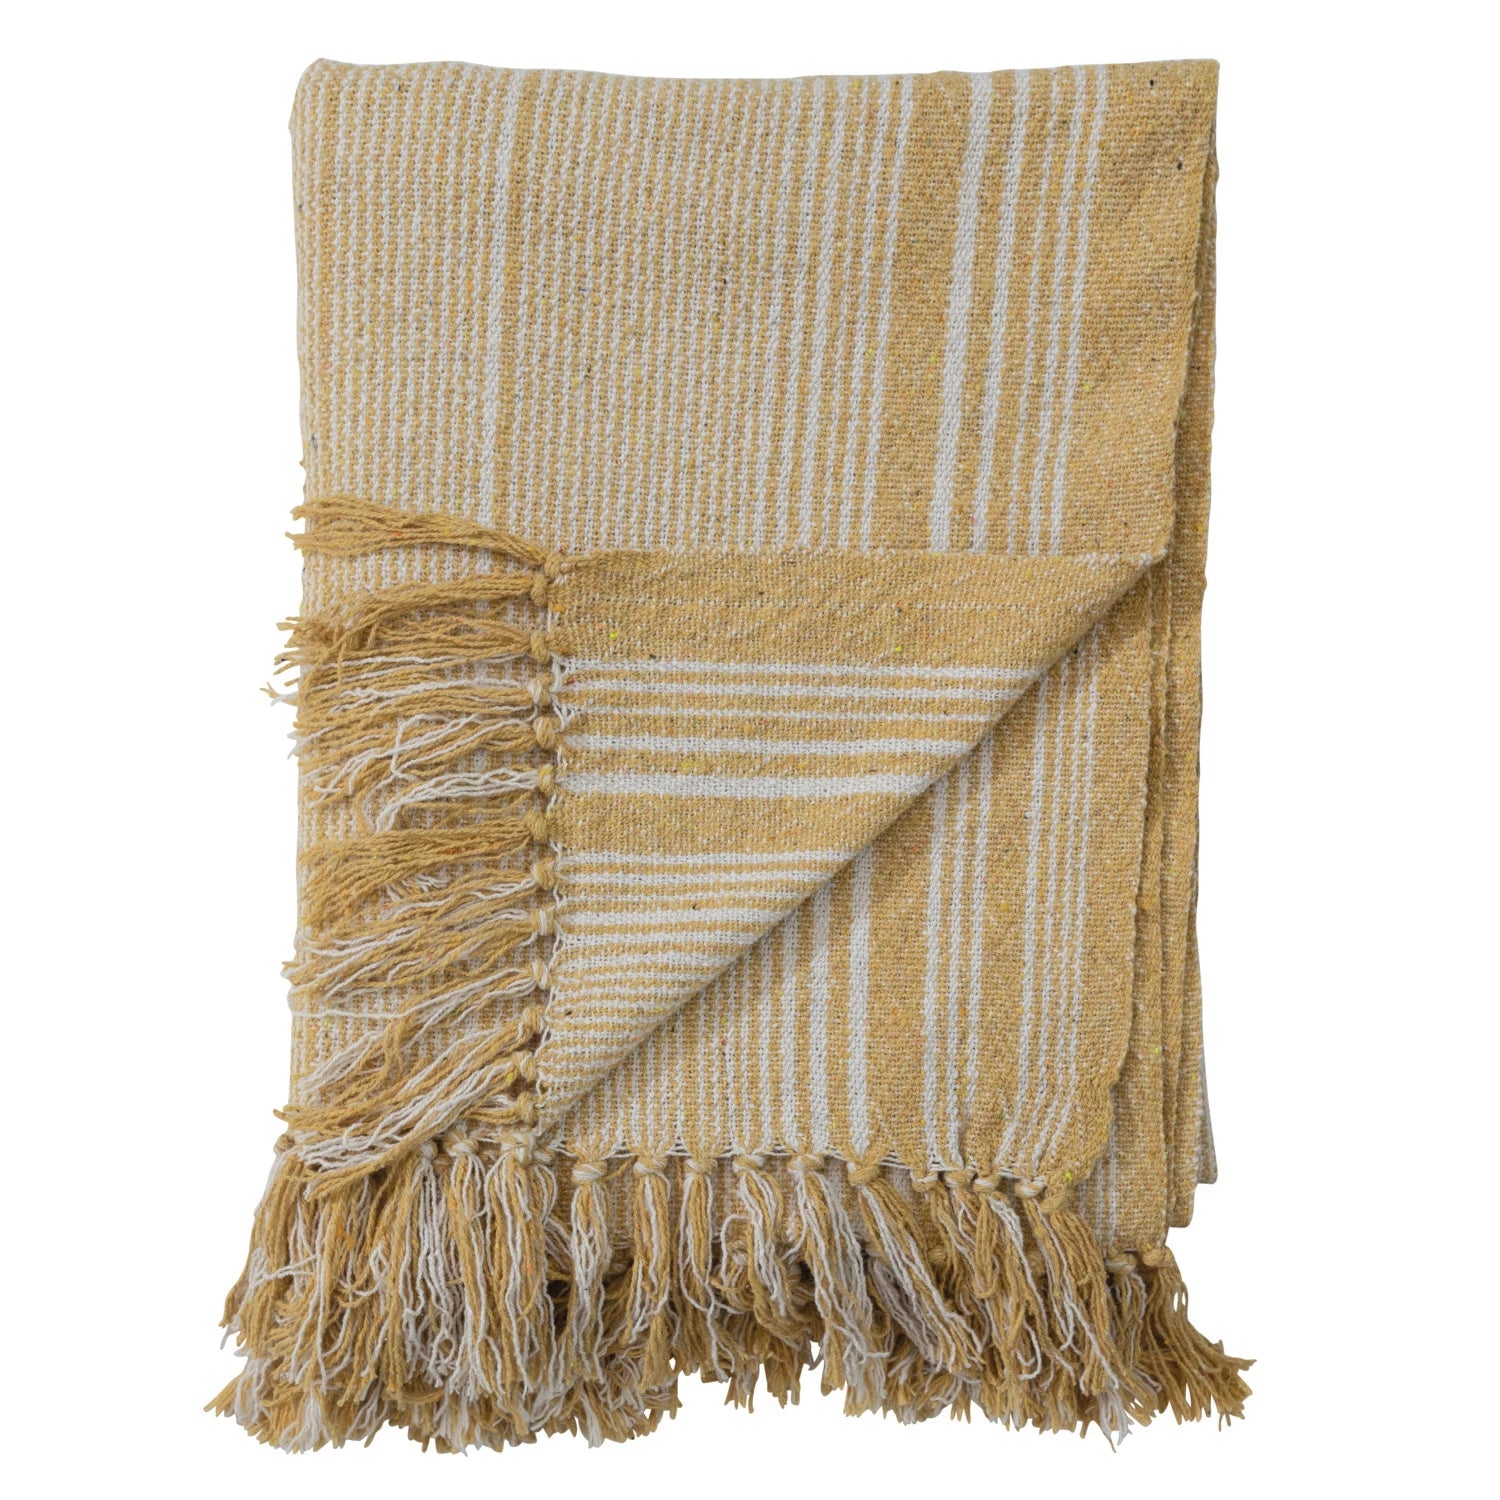 Woven Towel: Recycled Cotton